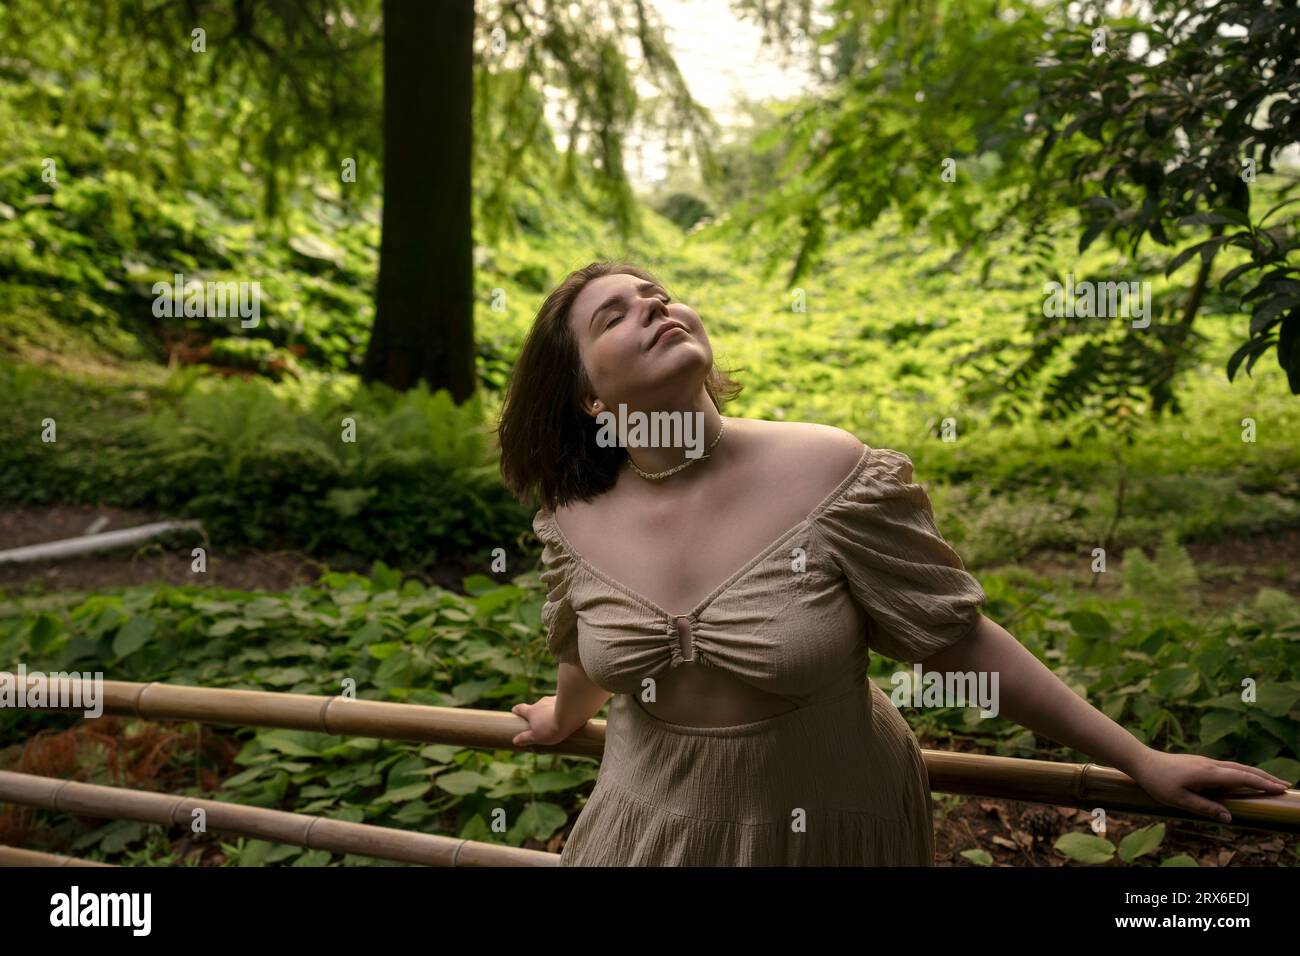 Smiling woman with eyes closed standing near fence in garden Stock Photo